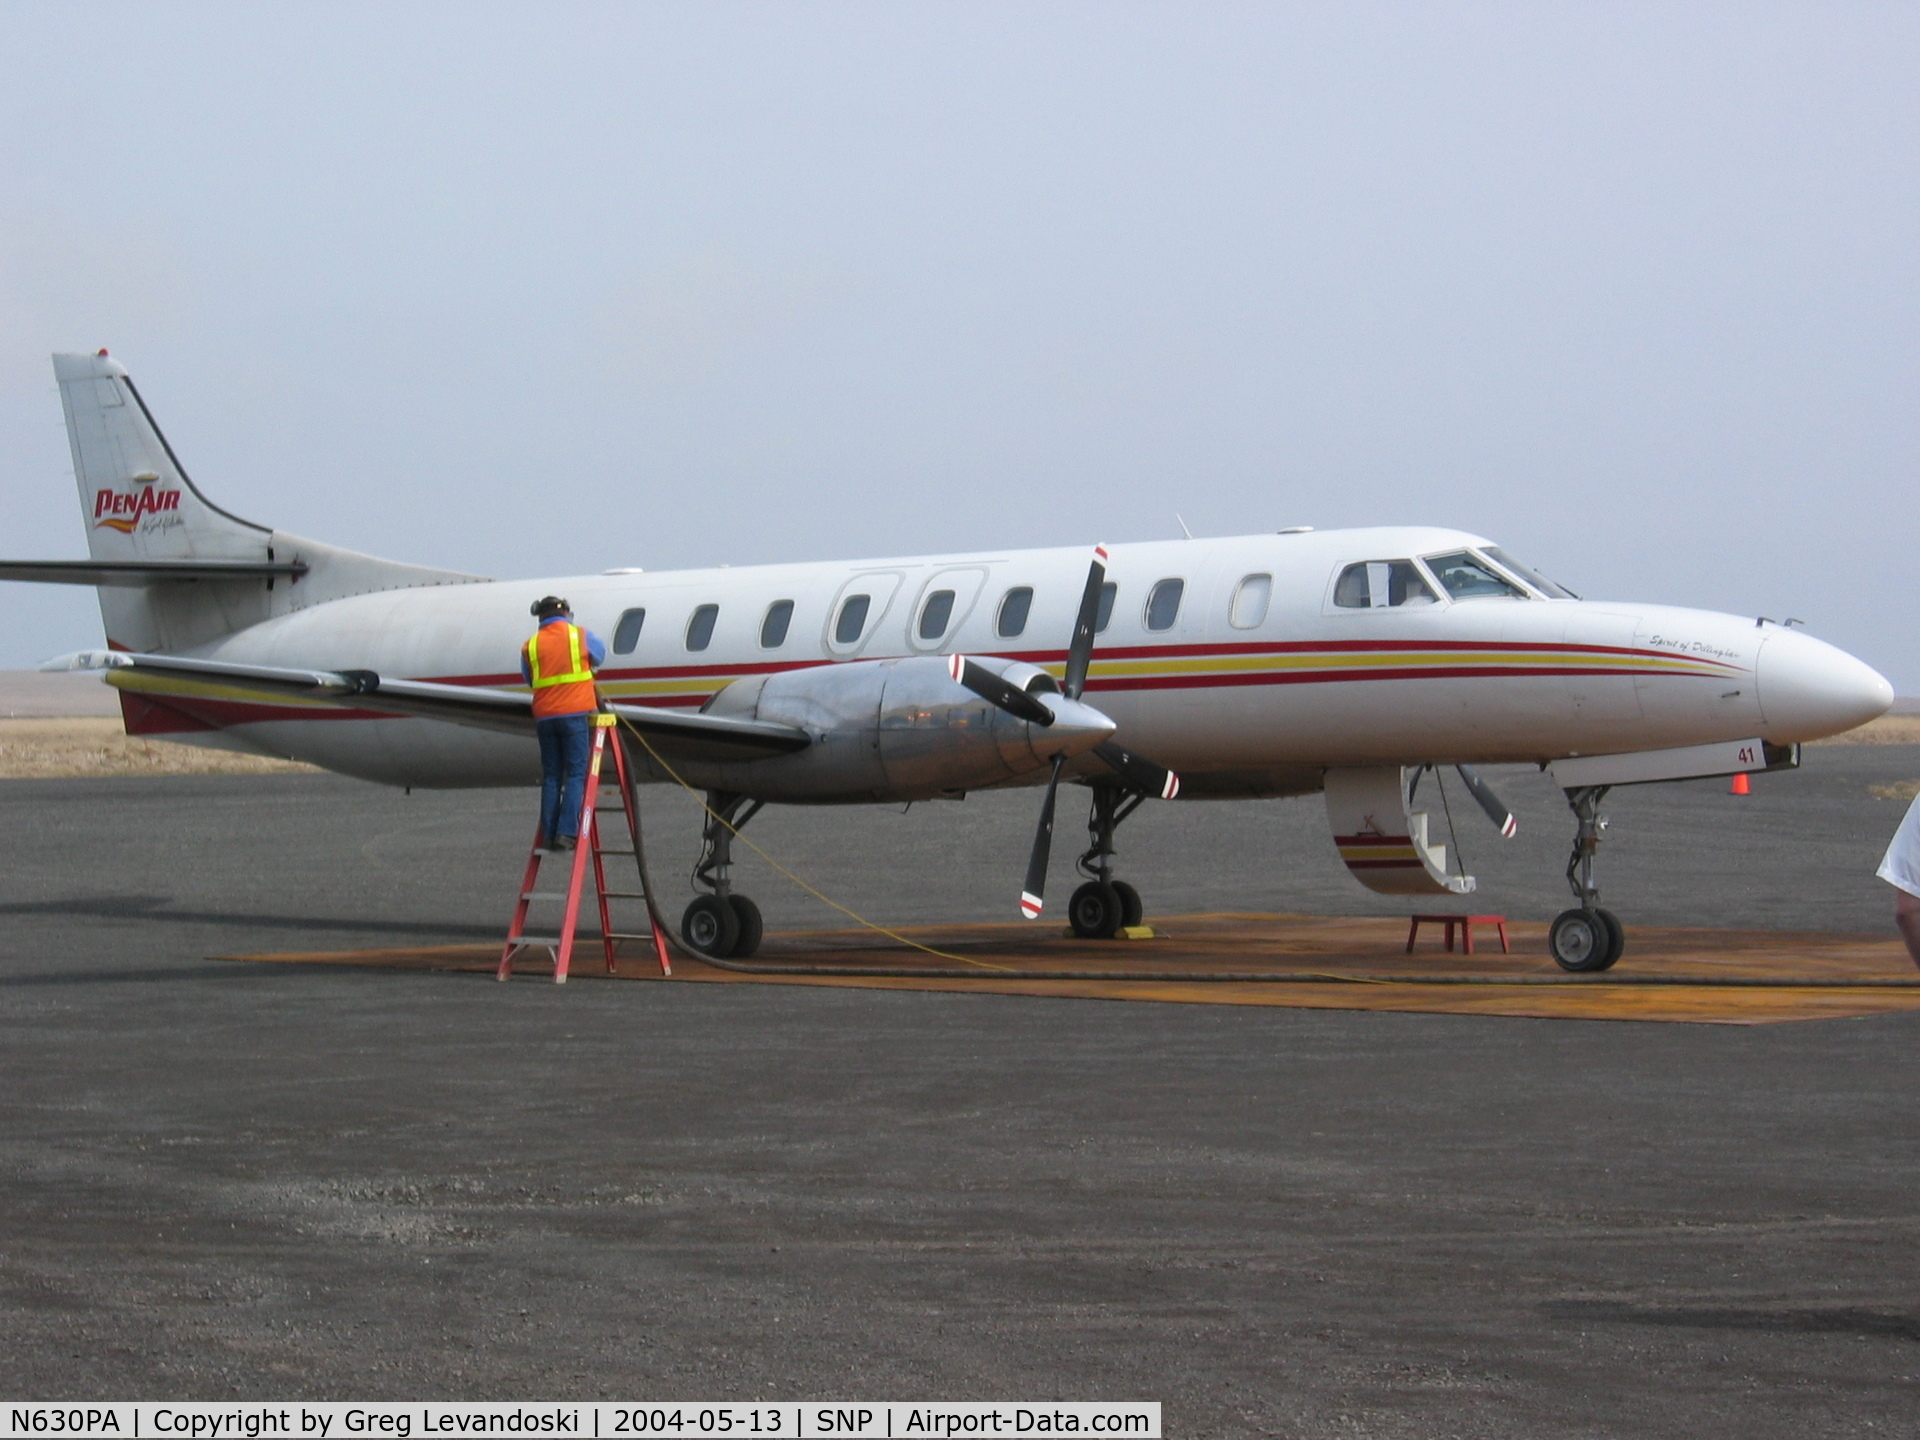 N630PA, 1981 Fairchild Swearingen SA-227AC Metro III C/N AC-463, Pretty sure I took this picture while refueling on St. Paul island, Alaska on our way to St. George, Alaska in May of 2014.